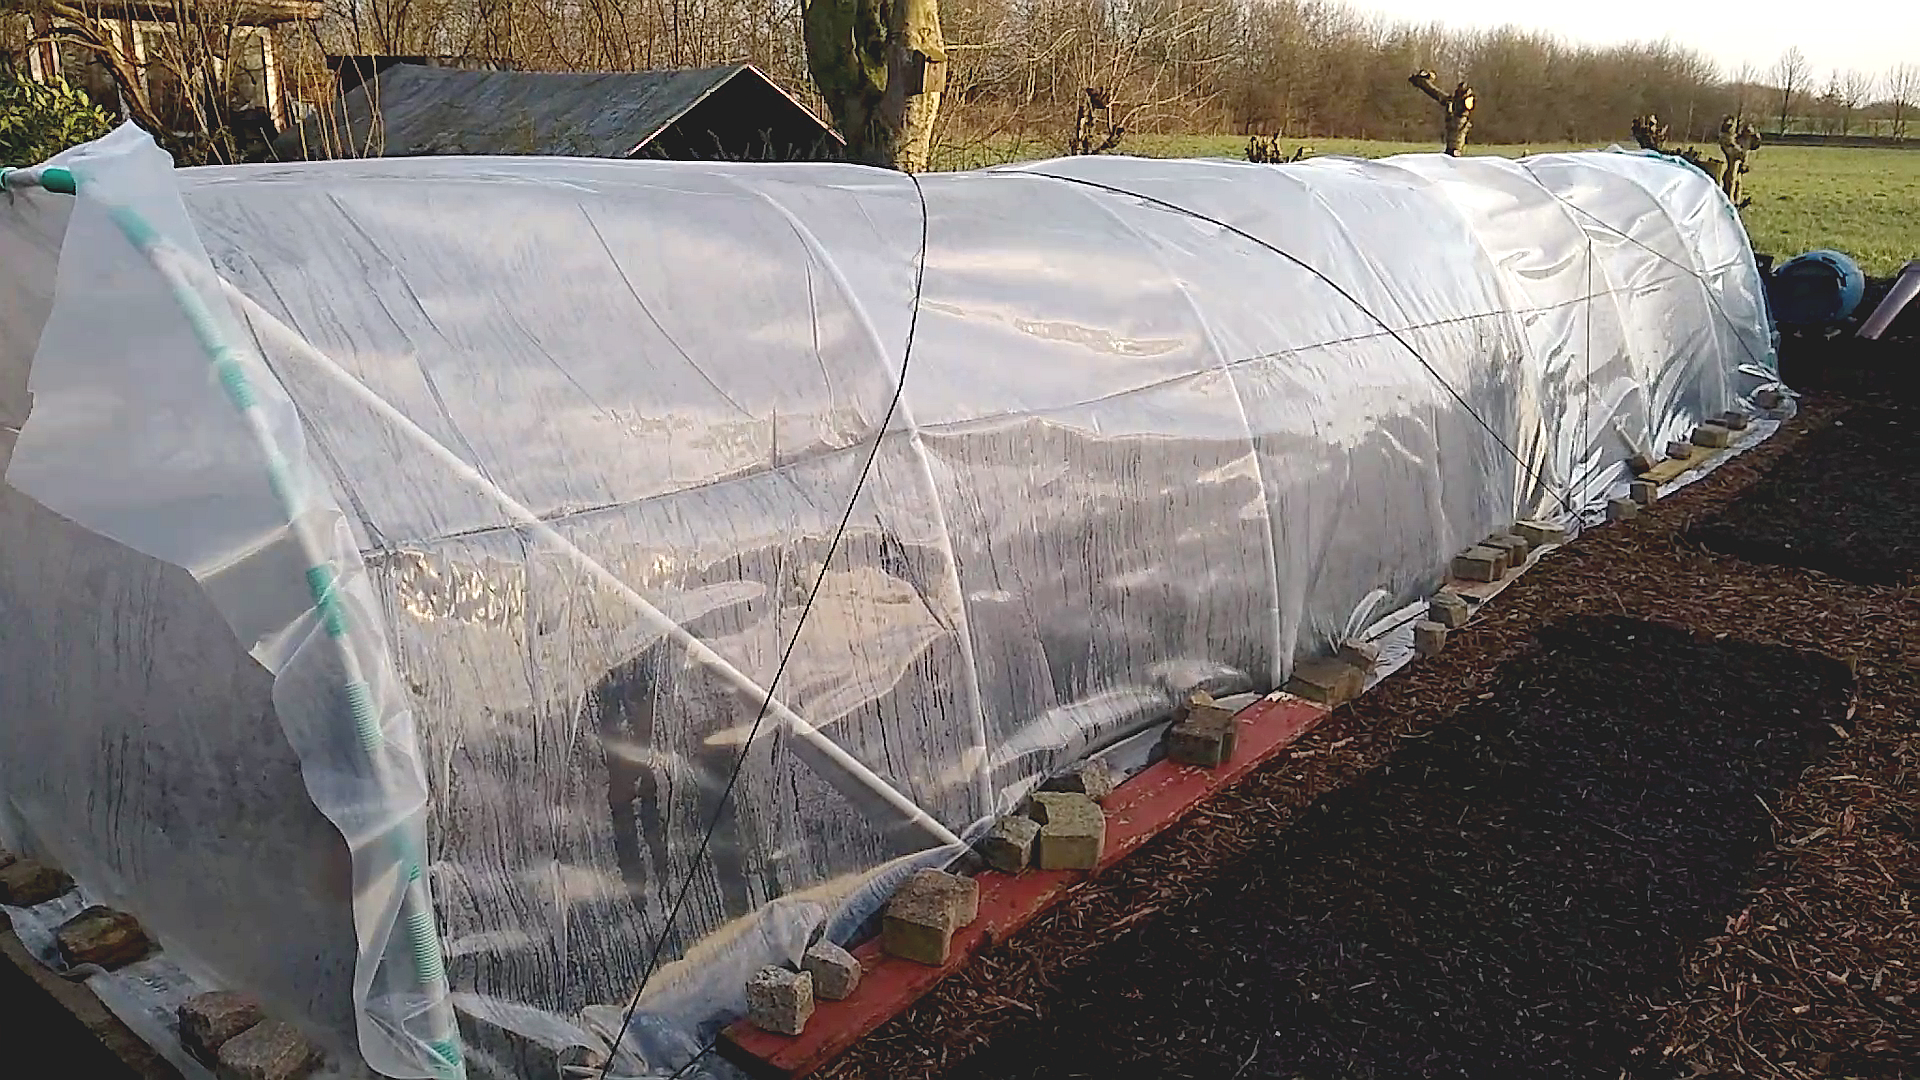 Mini polytunnel secure against wind with boards and stones